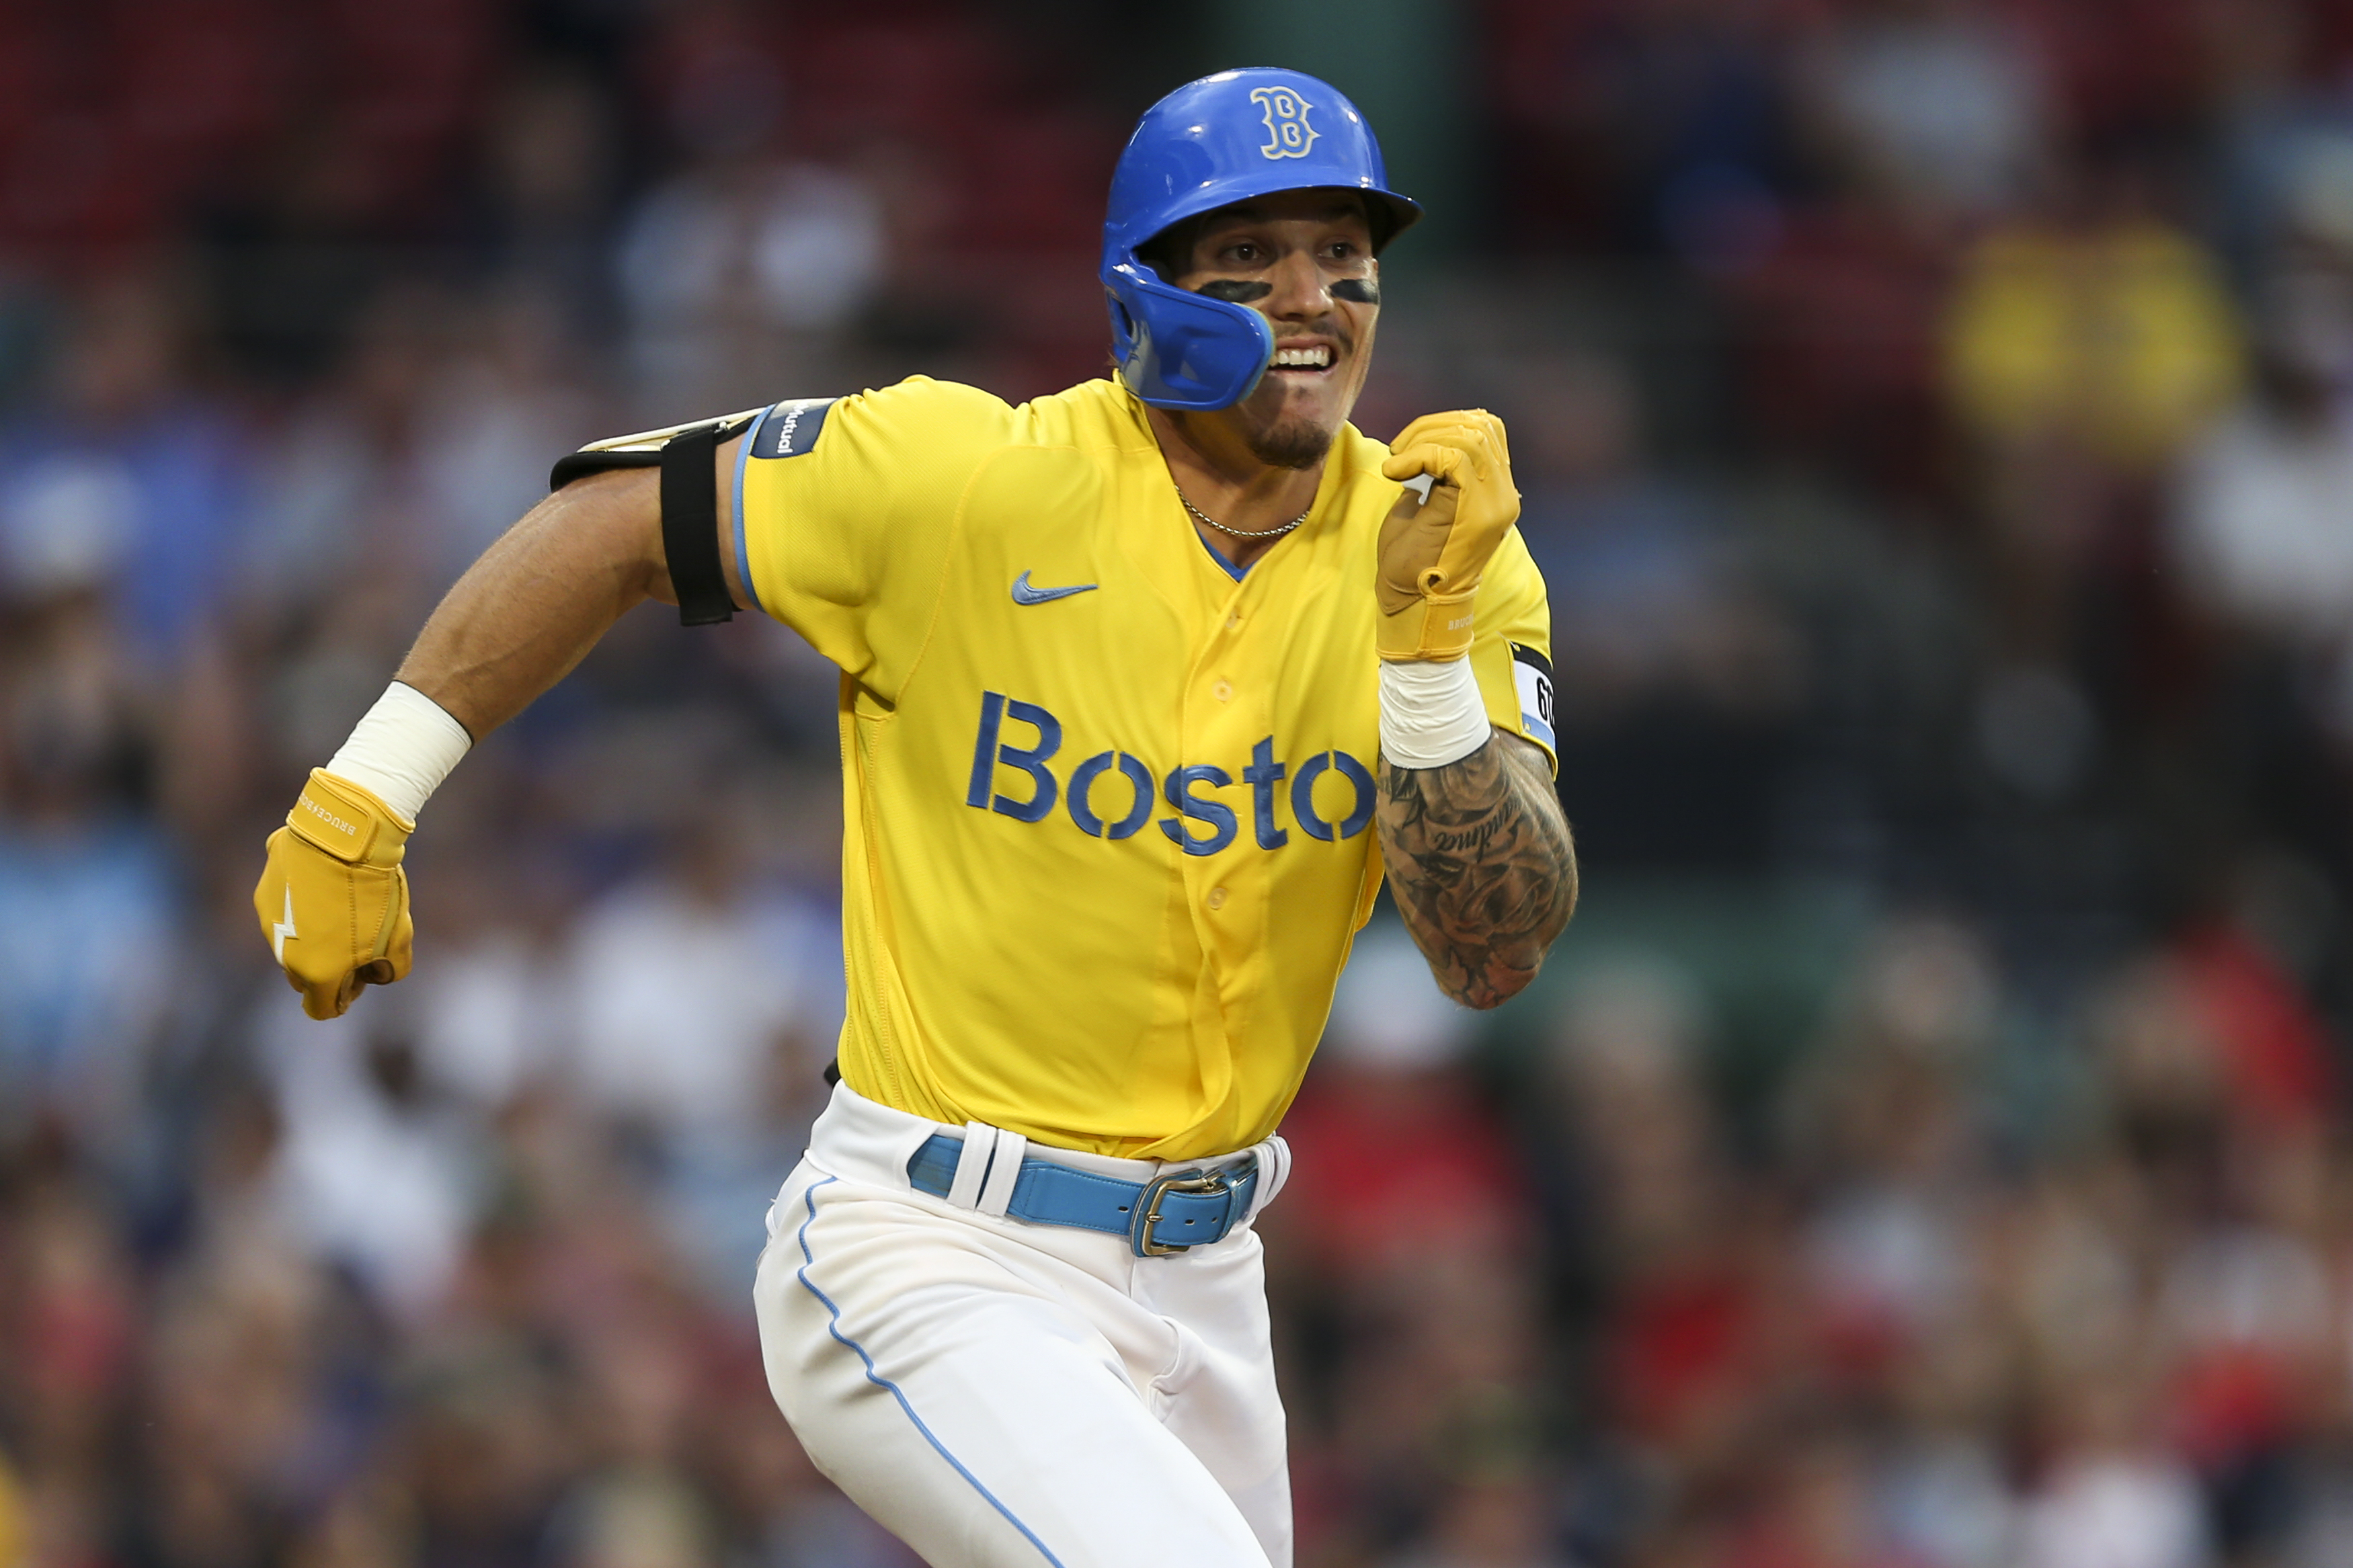 Boston Red Sox: Highlights and lowlights of the 2023 season